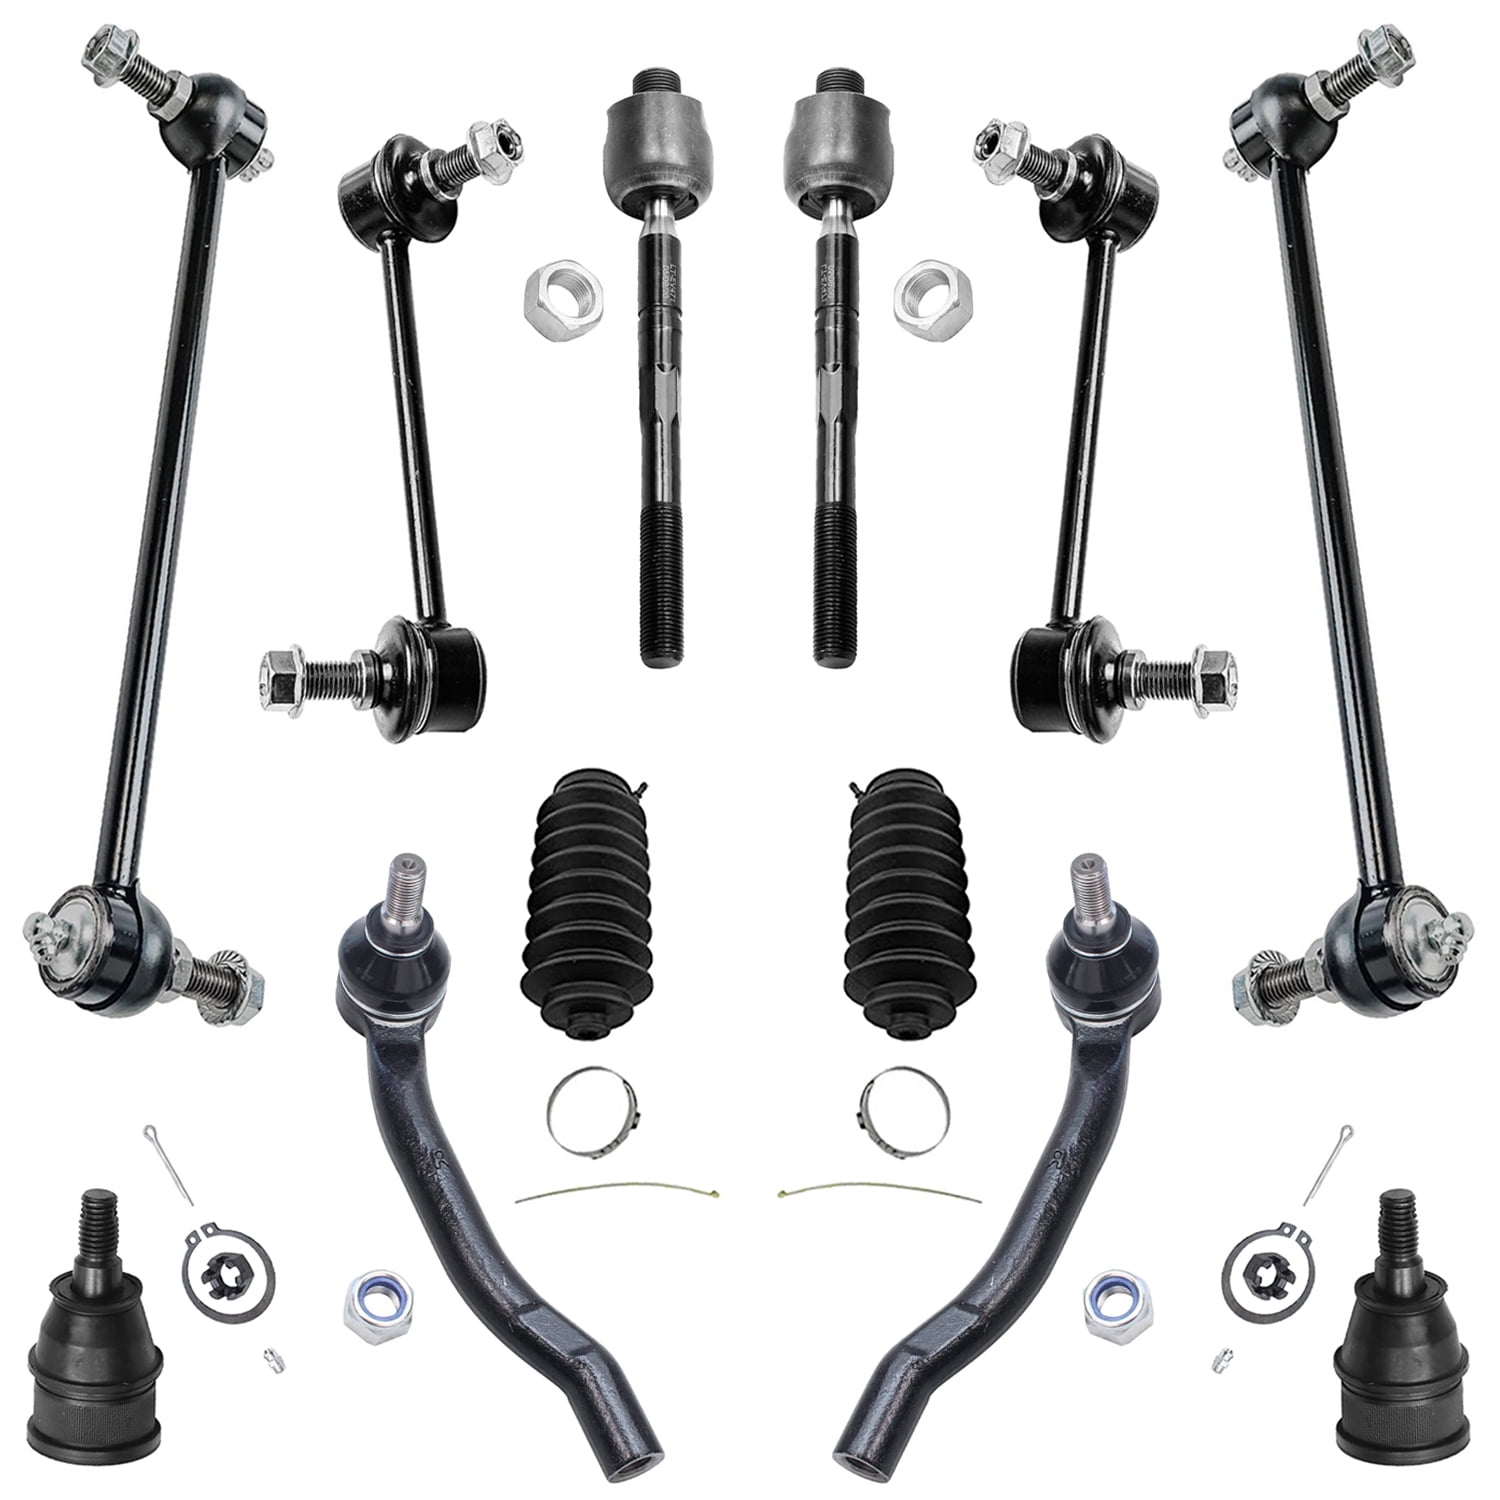 8pc Suspension Kit Tierod Detroit Axle w/Ball Joint Front Lower Control Arms Replacement for 2001-2005 Honda Pilot Acura MDX 